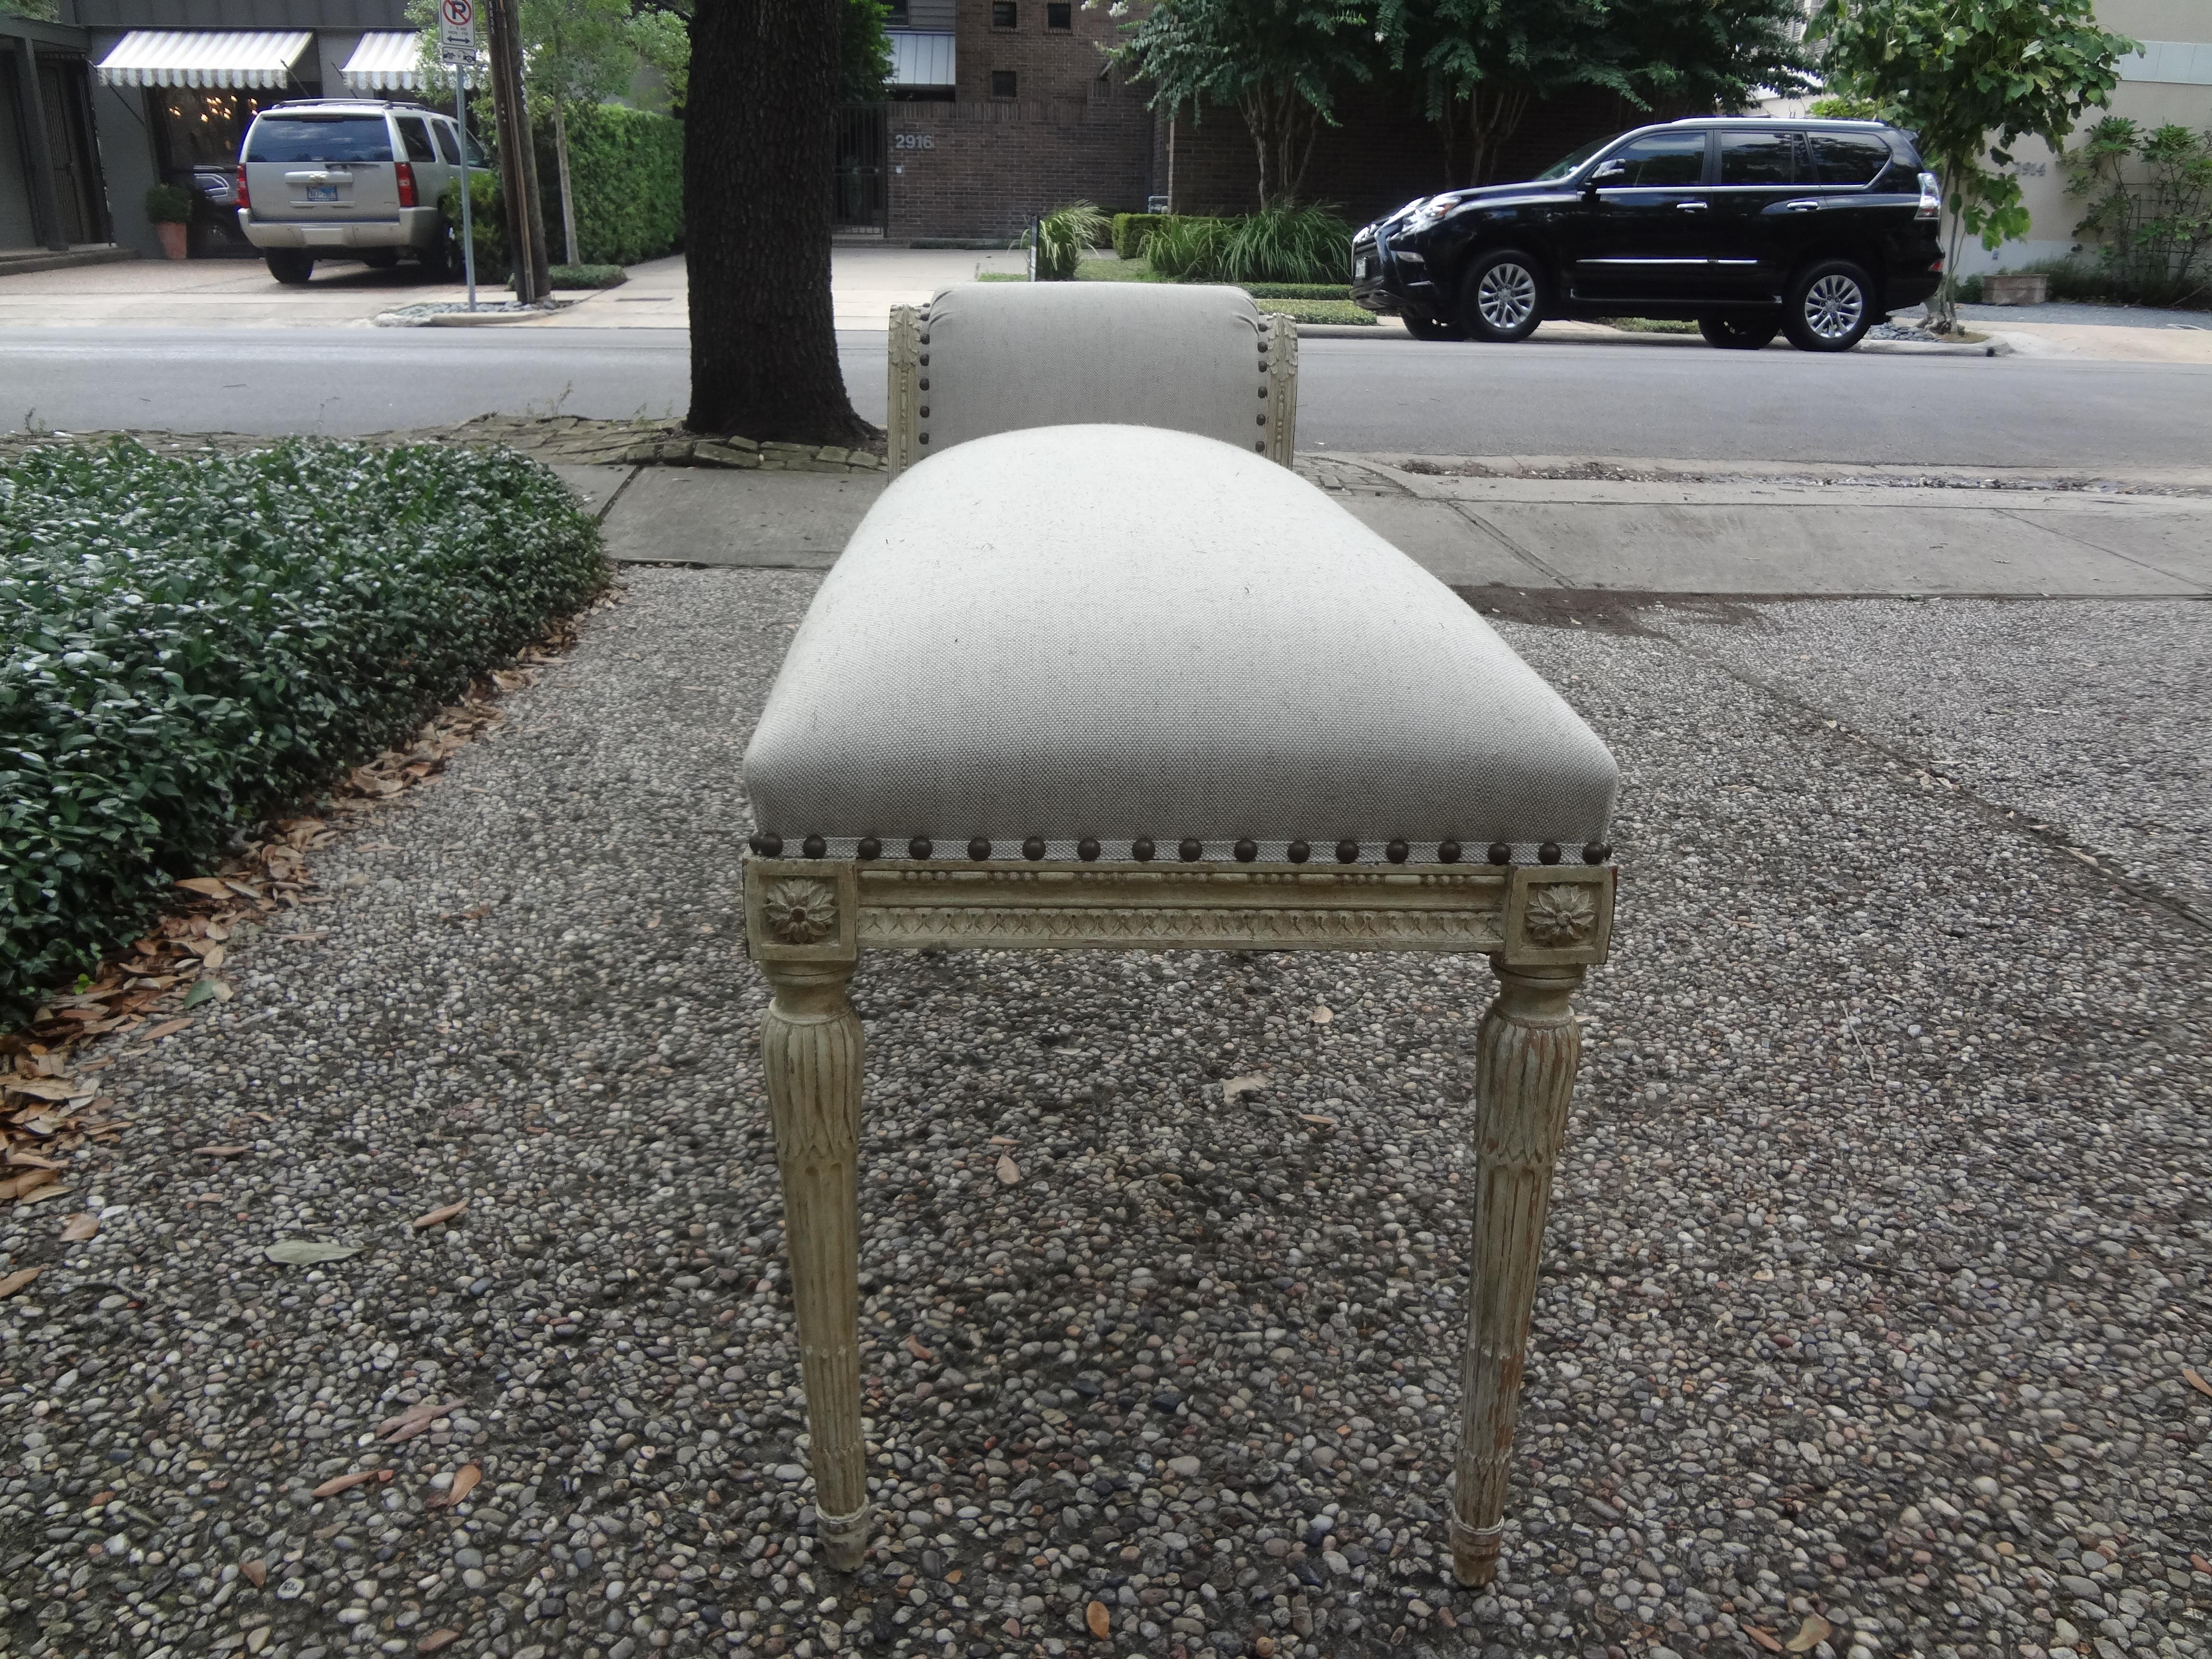 Stunning 19th century French Louis XVI style painted bench. This unusual antique French Louis XVI style painted one-arm bench has been taken down to the frame and professionally upholstered in oatmeal colored linen with spaced brass nailhead